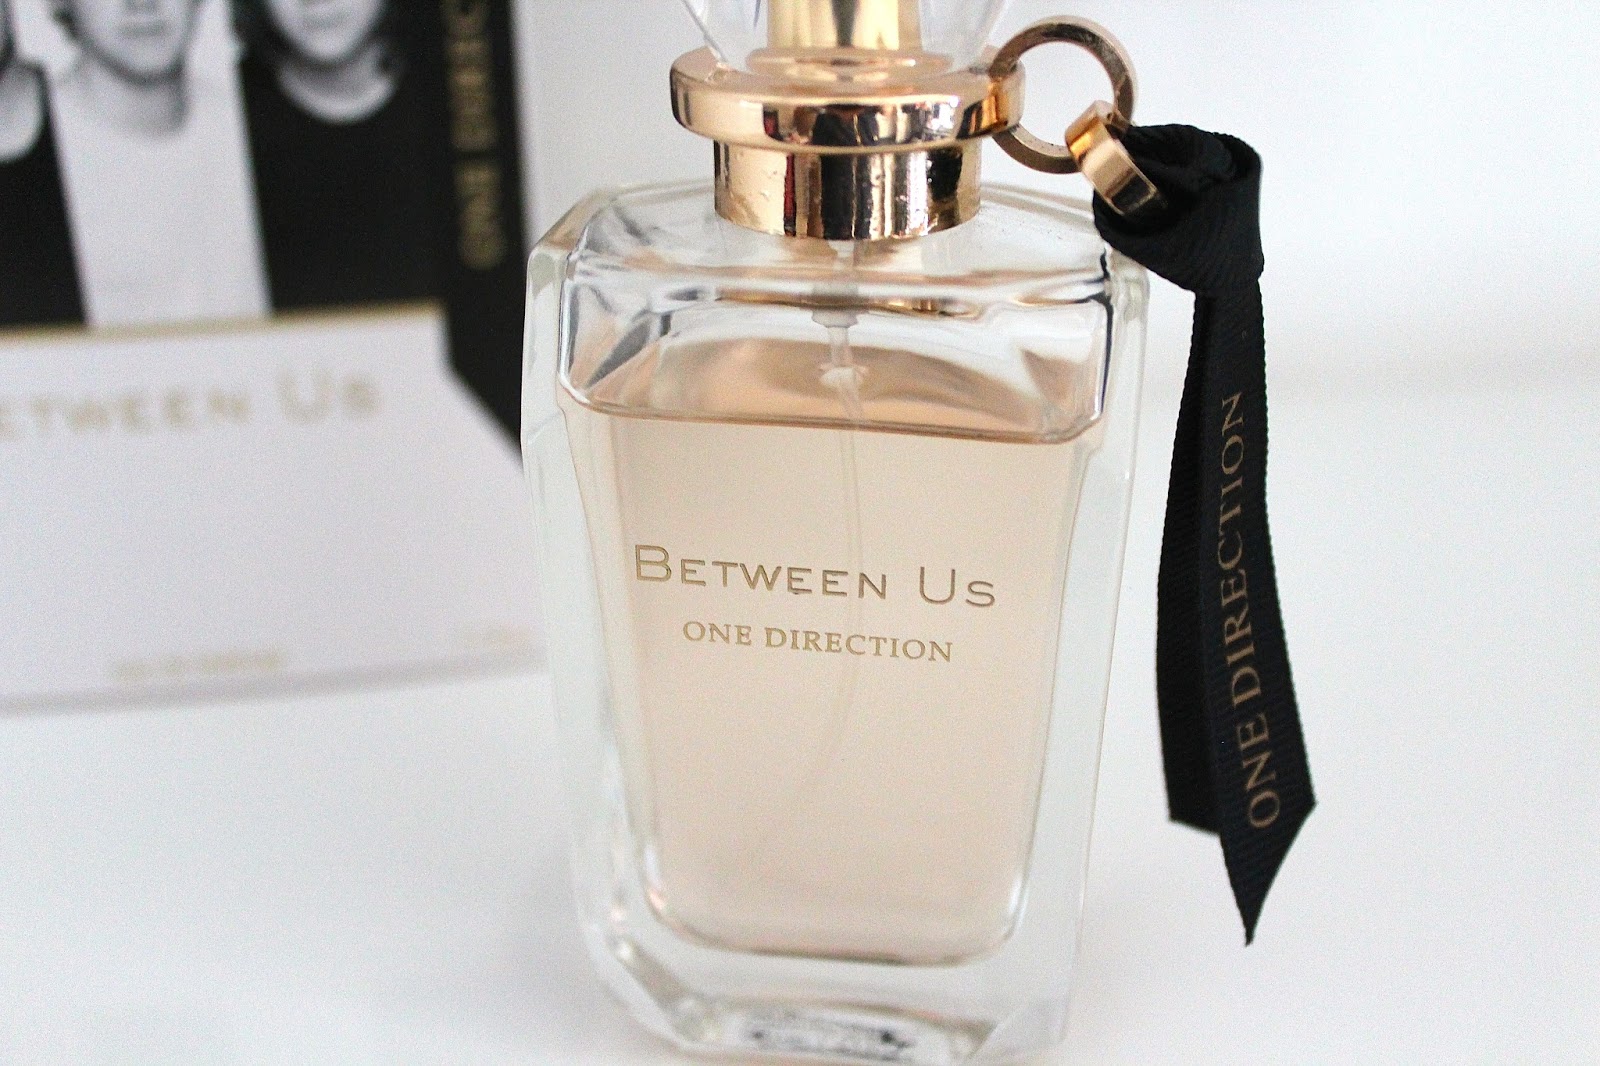 One Direction Between Us Fragrance Bags Of Beauty